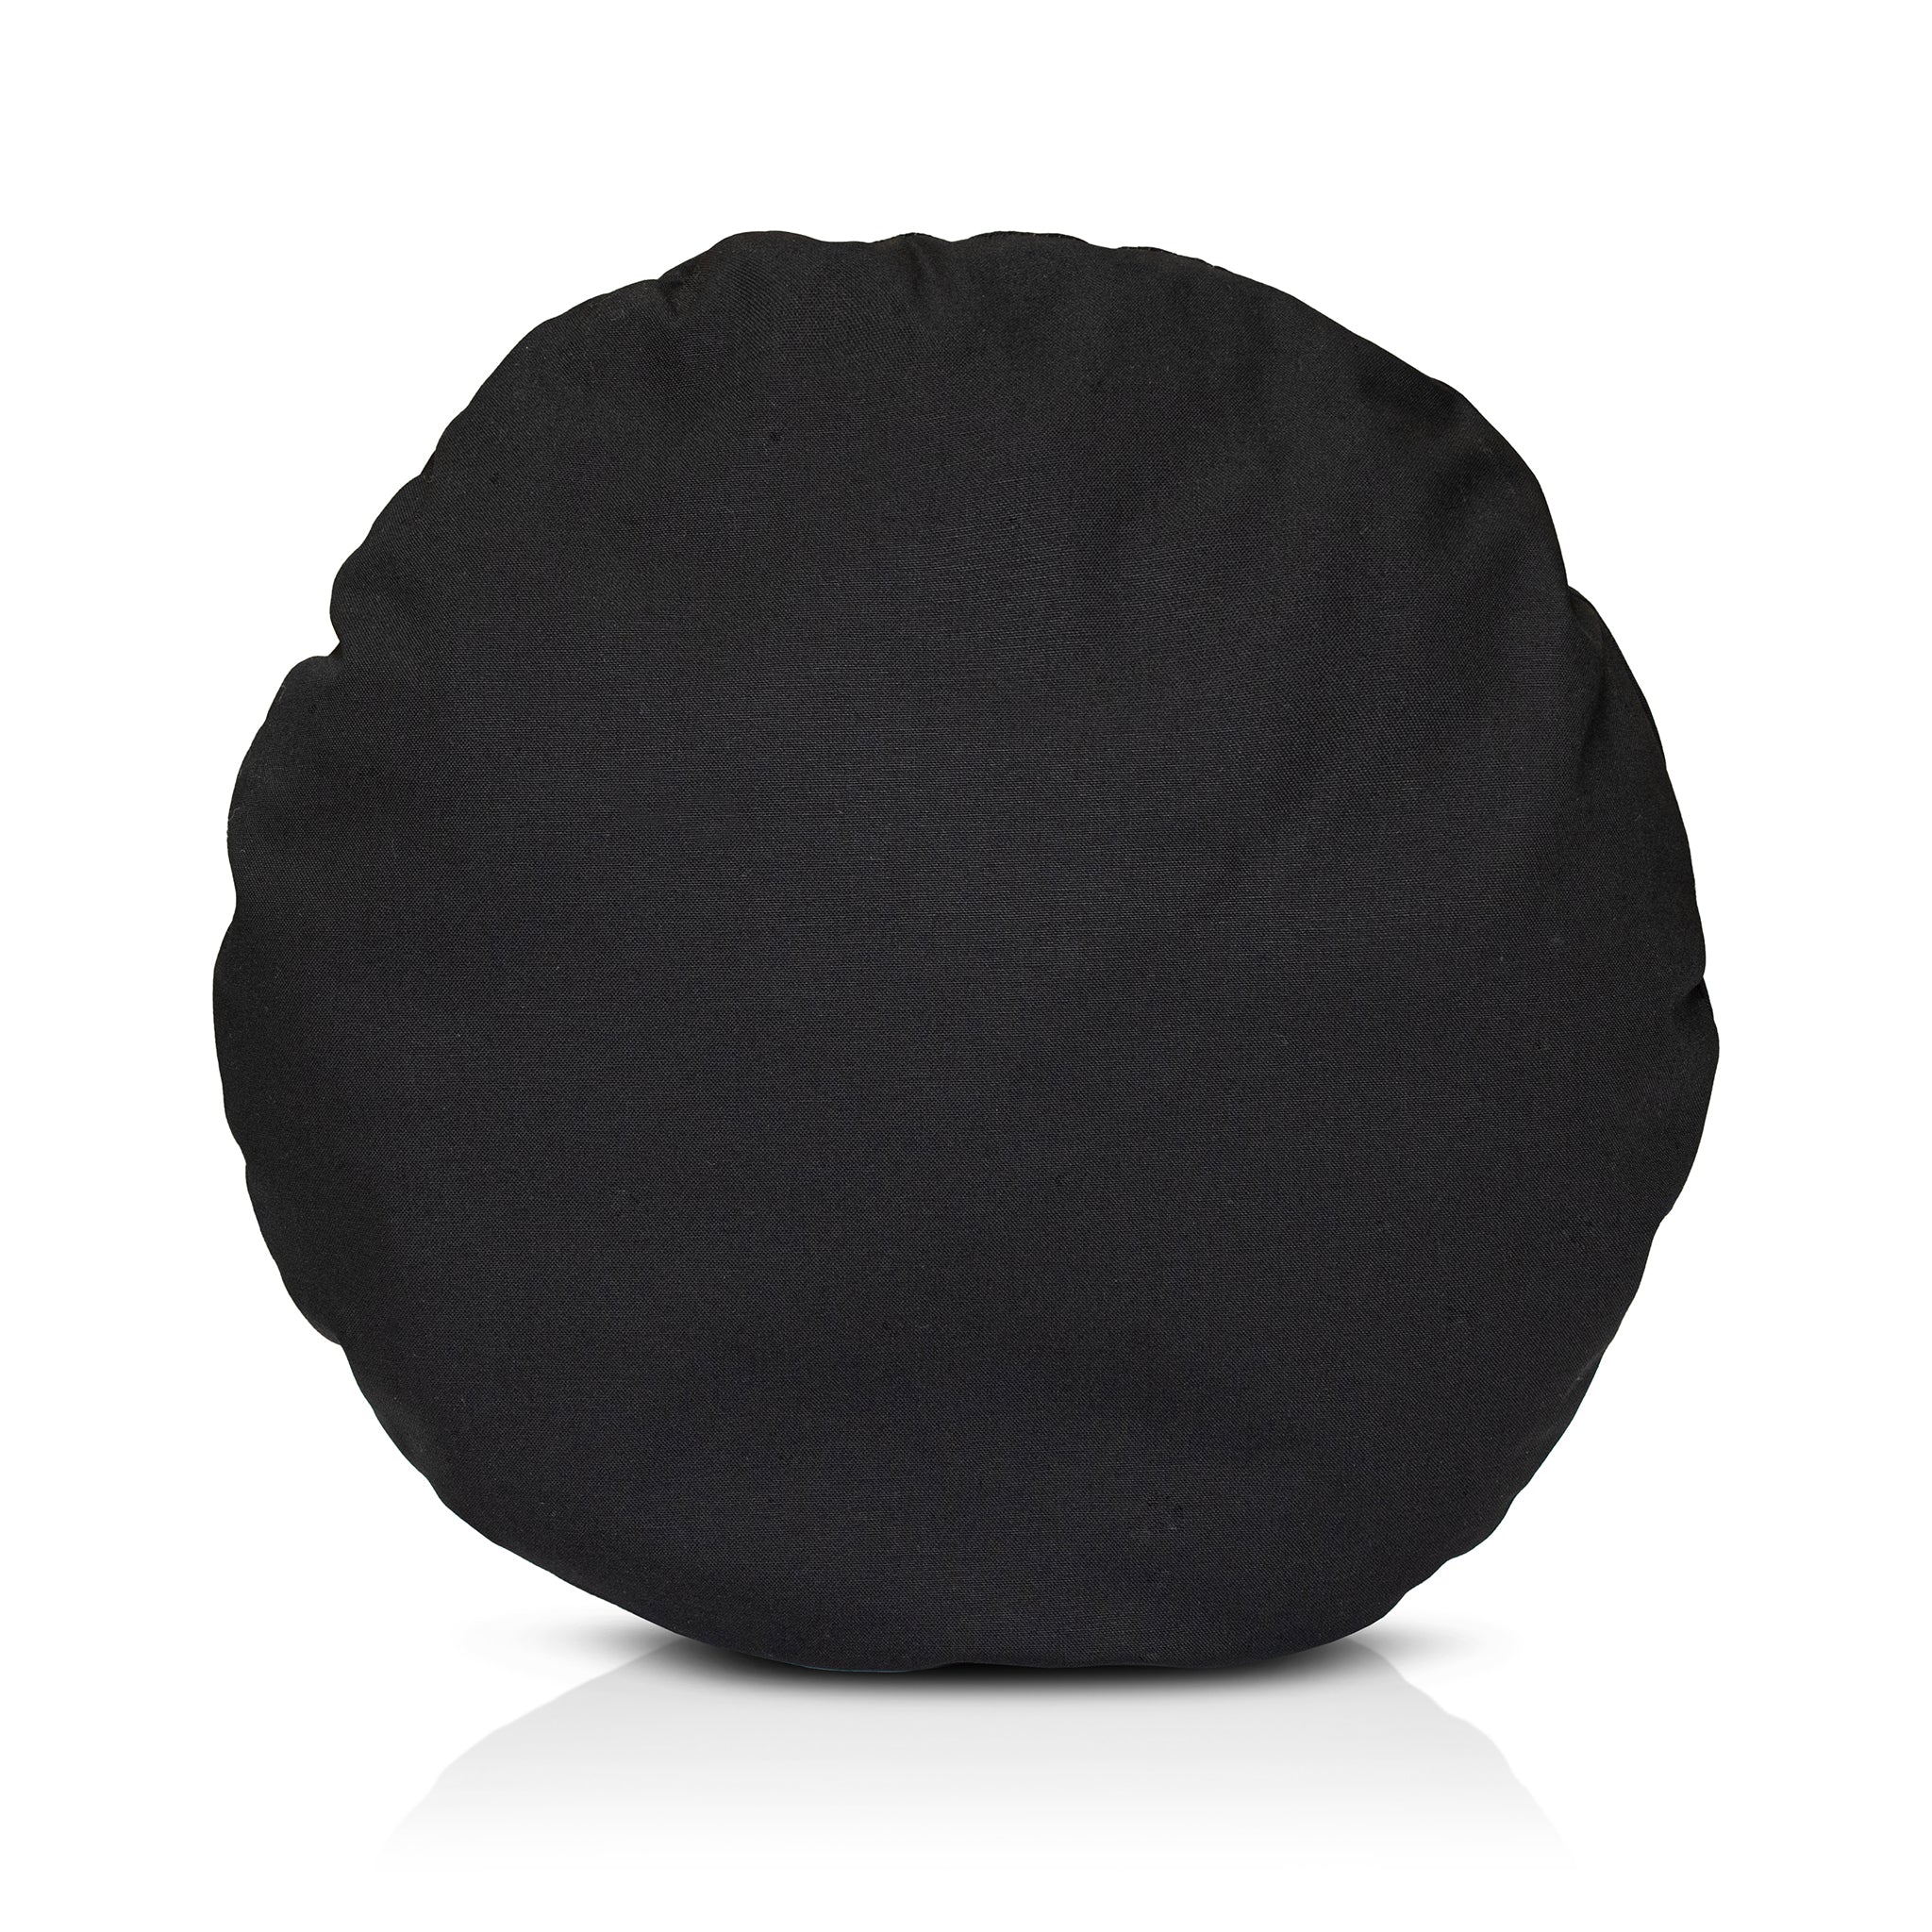 A chimney sheep PetSnug wool filled cushion. The wool cushion sits upon a white background. This is a large black cushion.